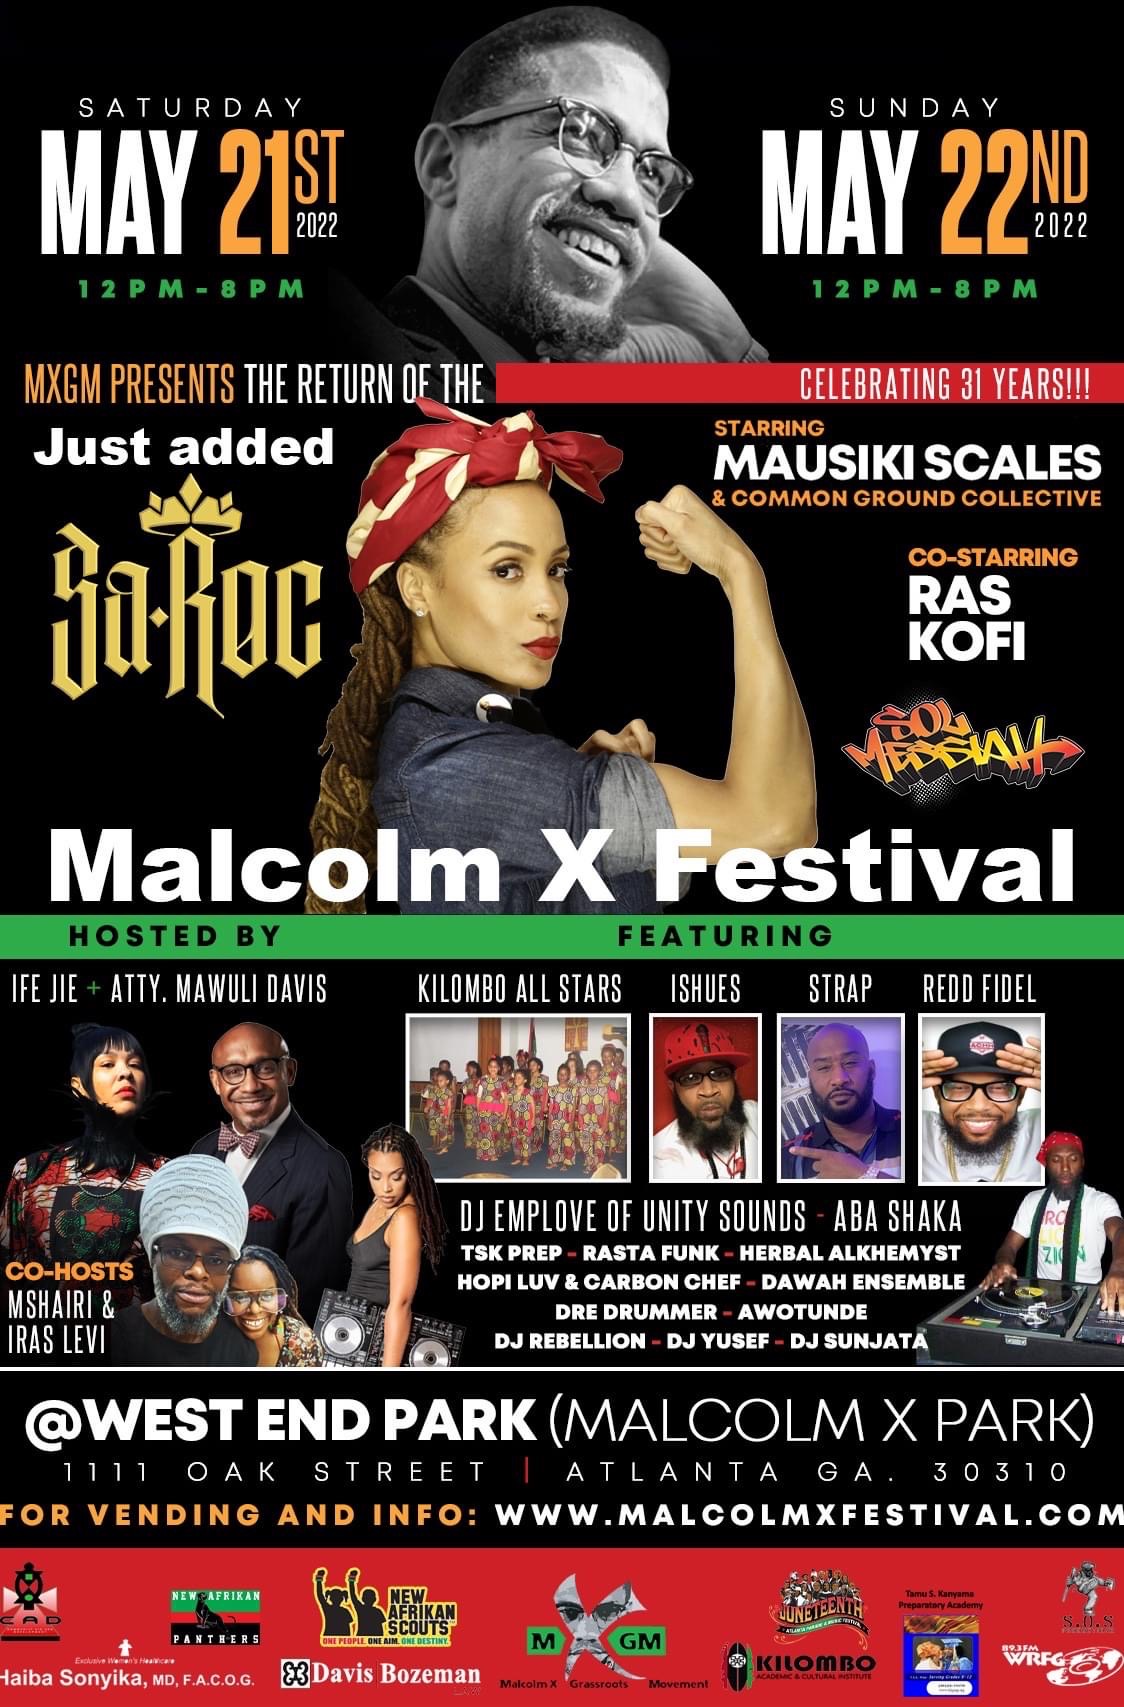 31st Annual Malcolm X Festival at West End Park on Sun, May 22nd, 2022